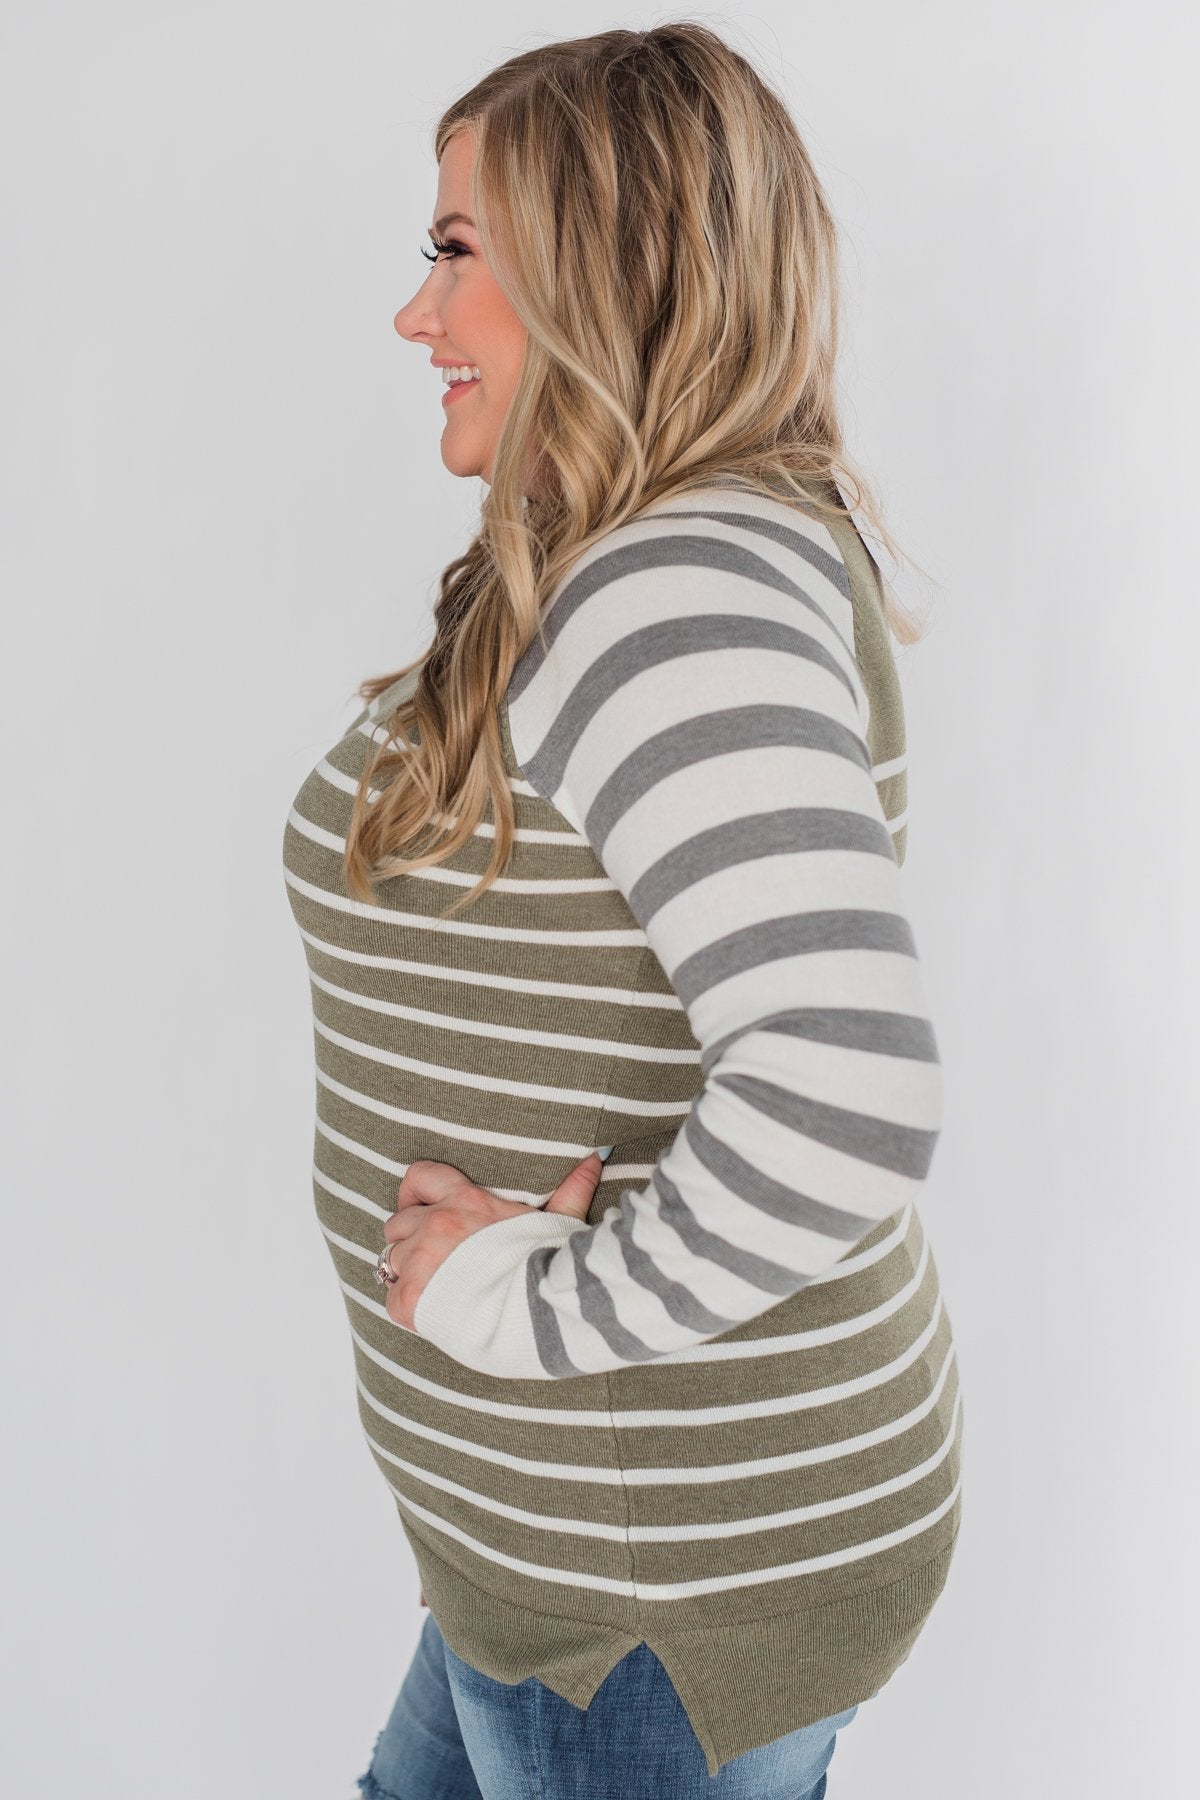 Stuck on You Striped Sweater- Ivory & Olive